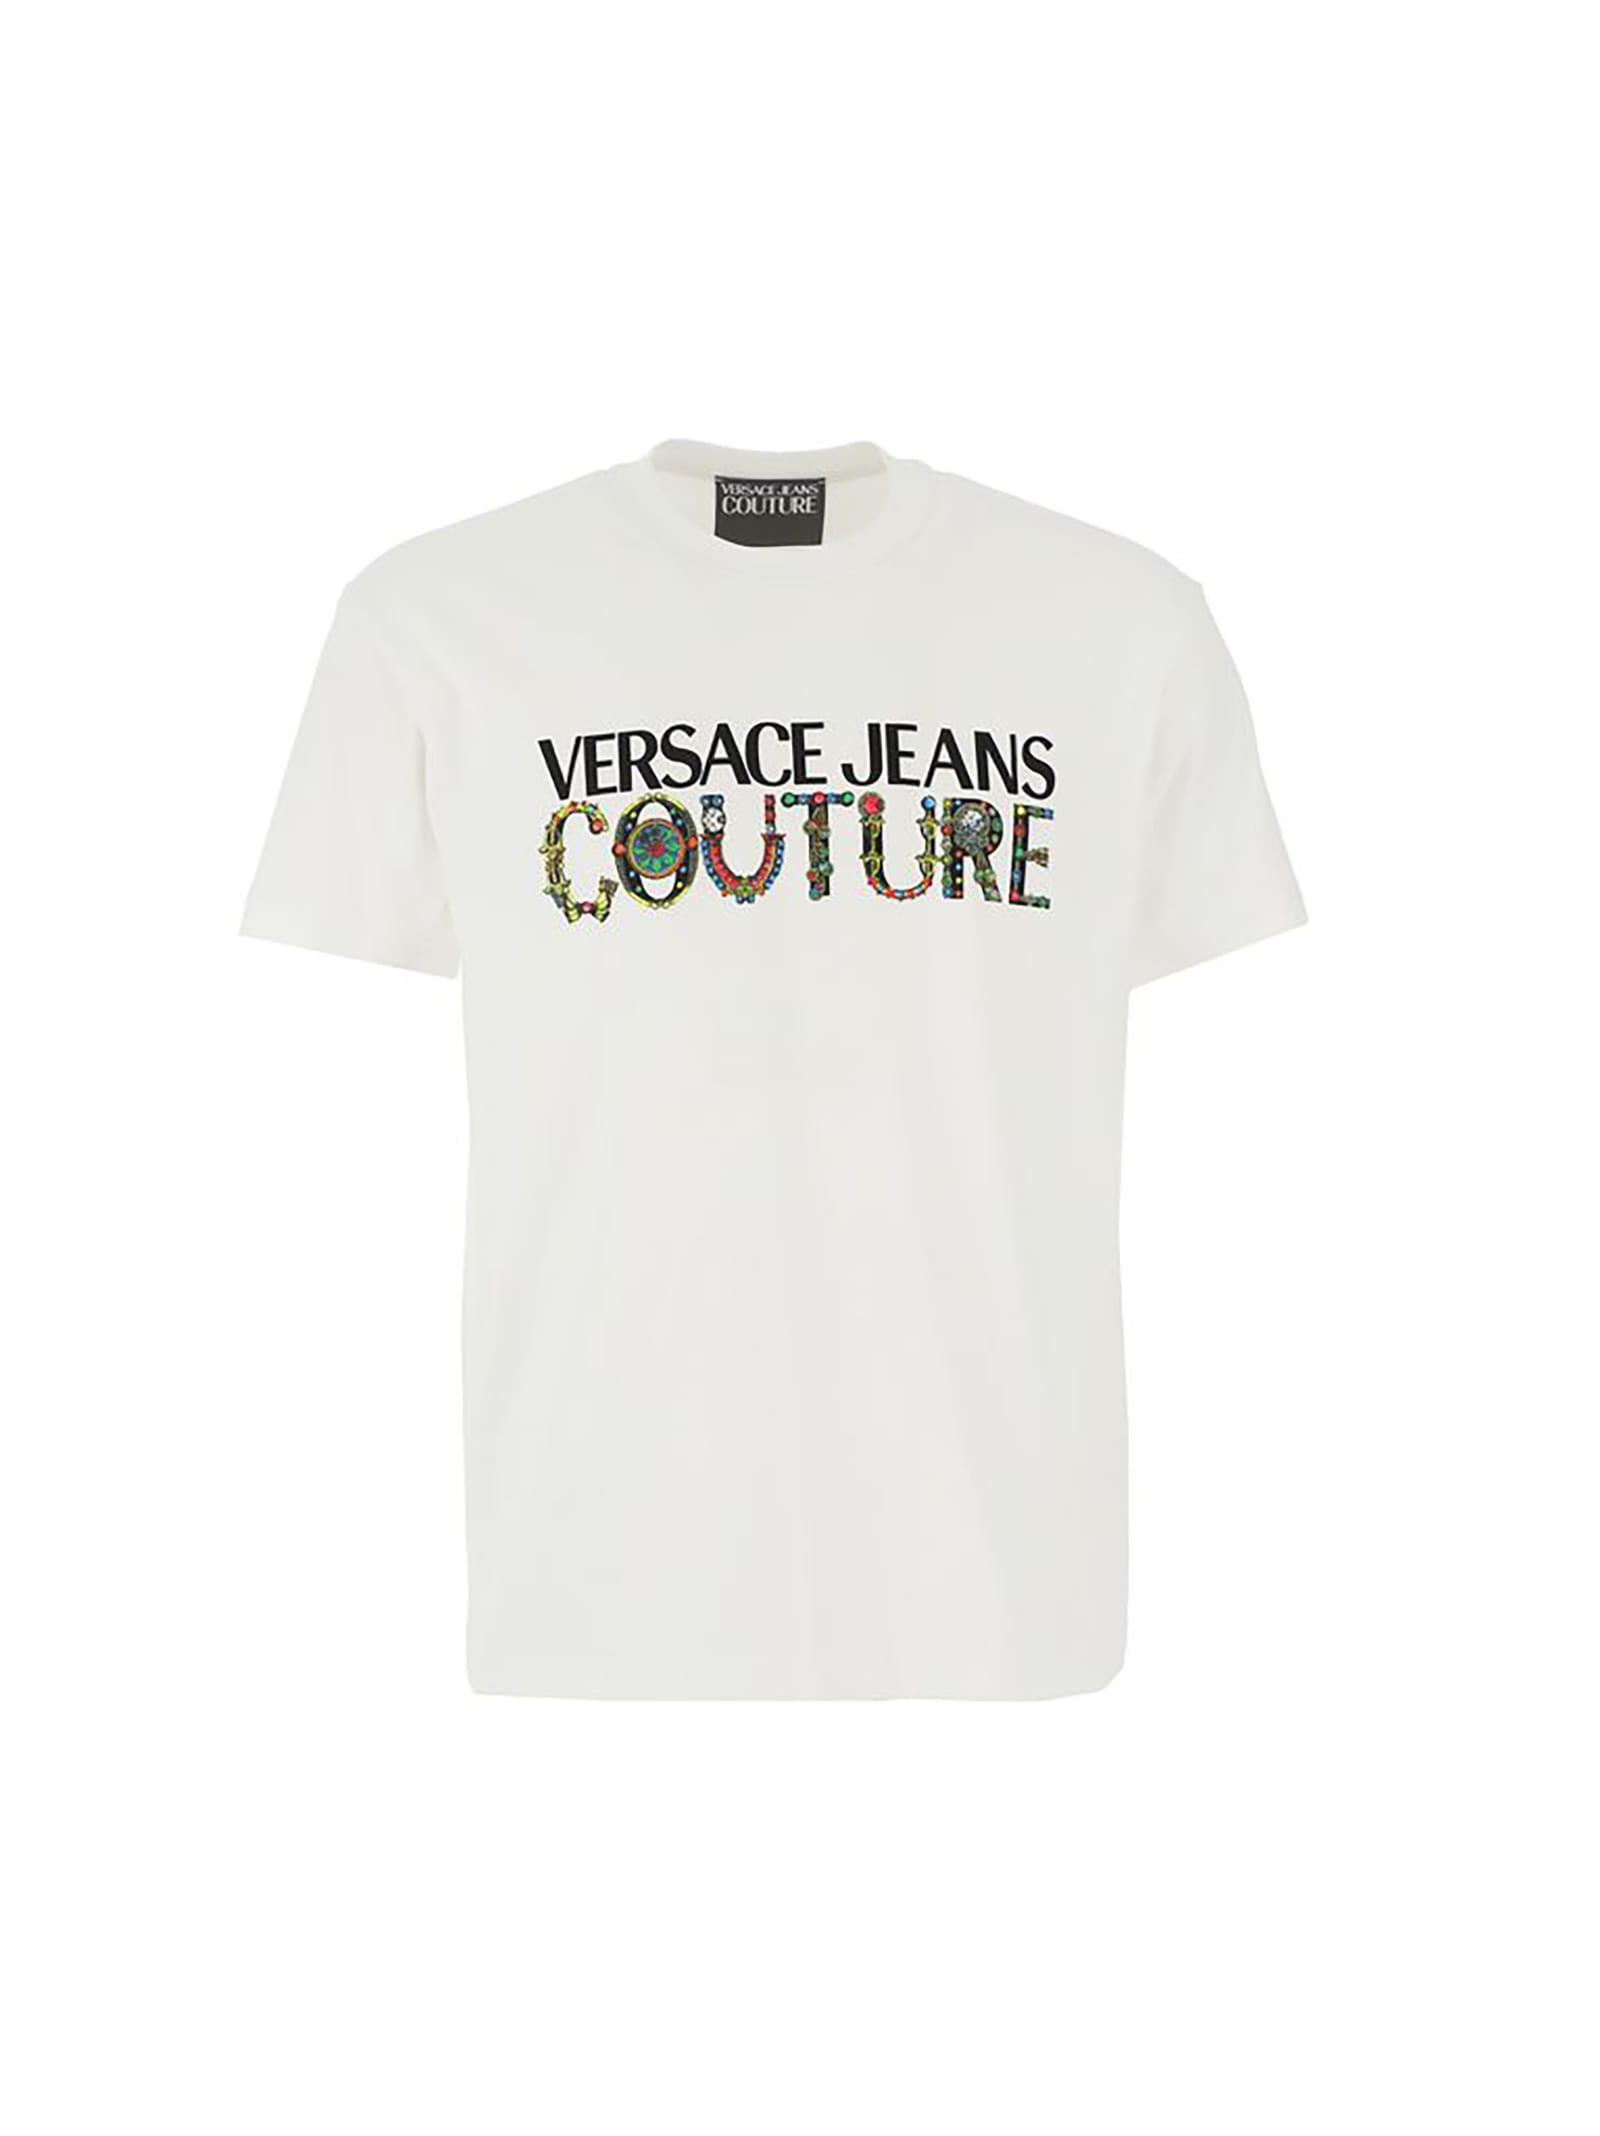 Versace Jeans Couture T-shirt Organic Cotton Brand Name On Chest for Men -  Lyst